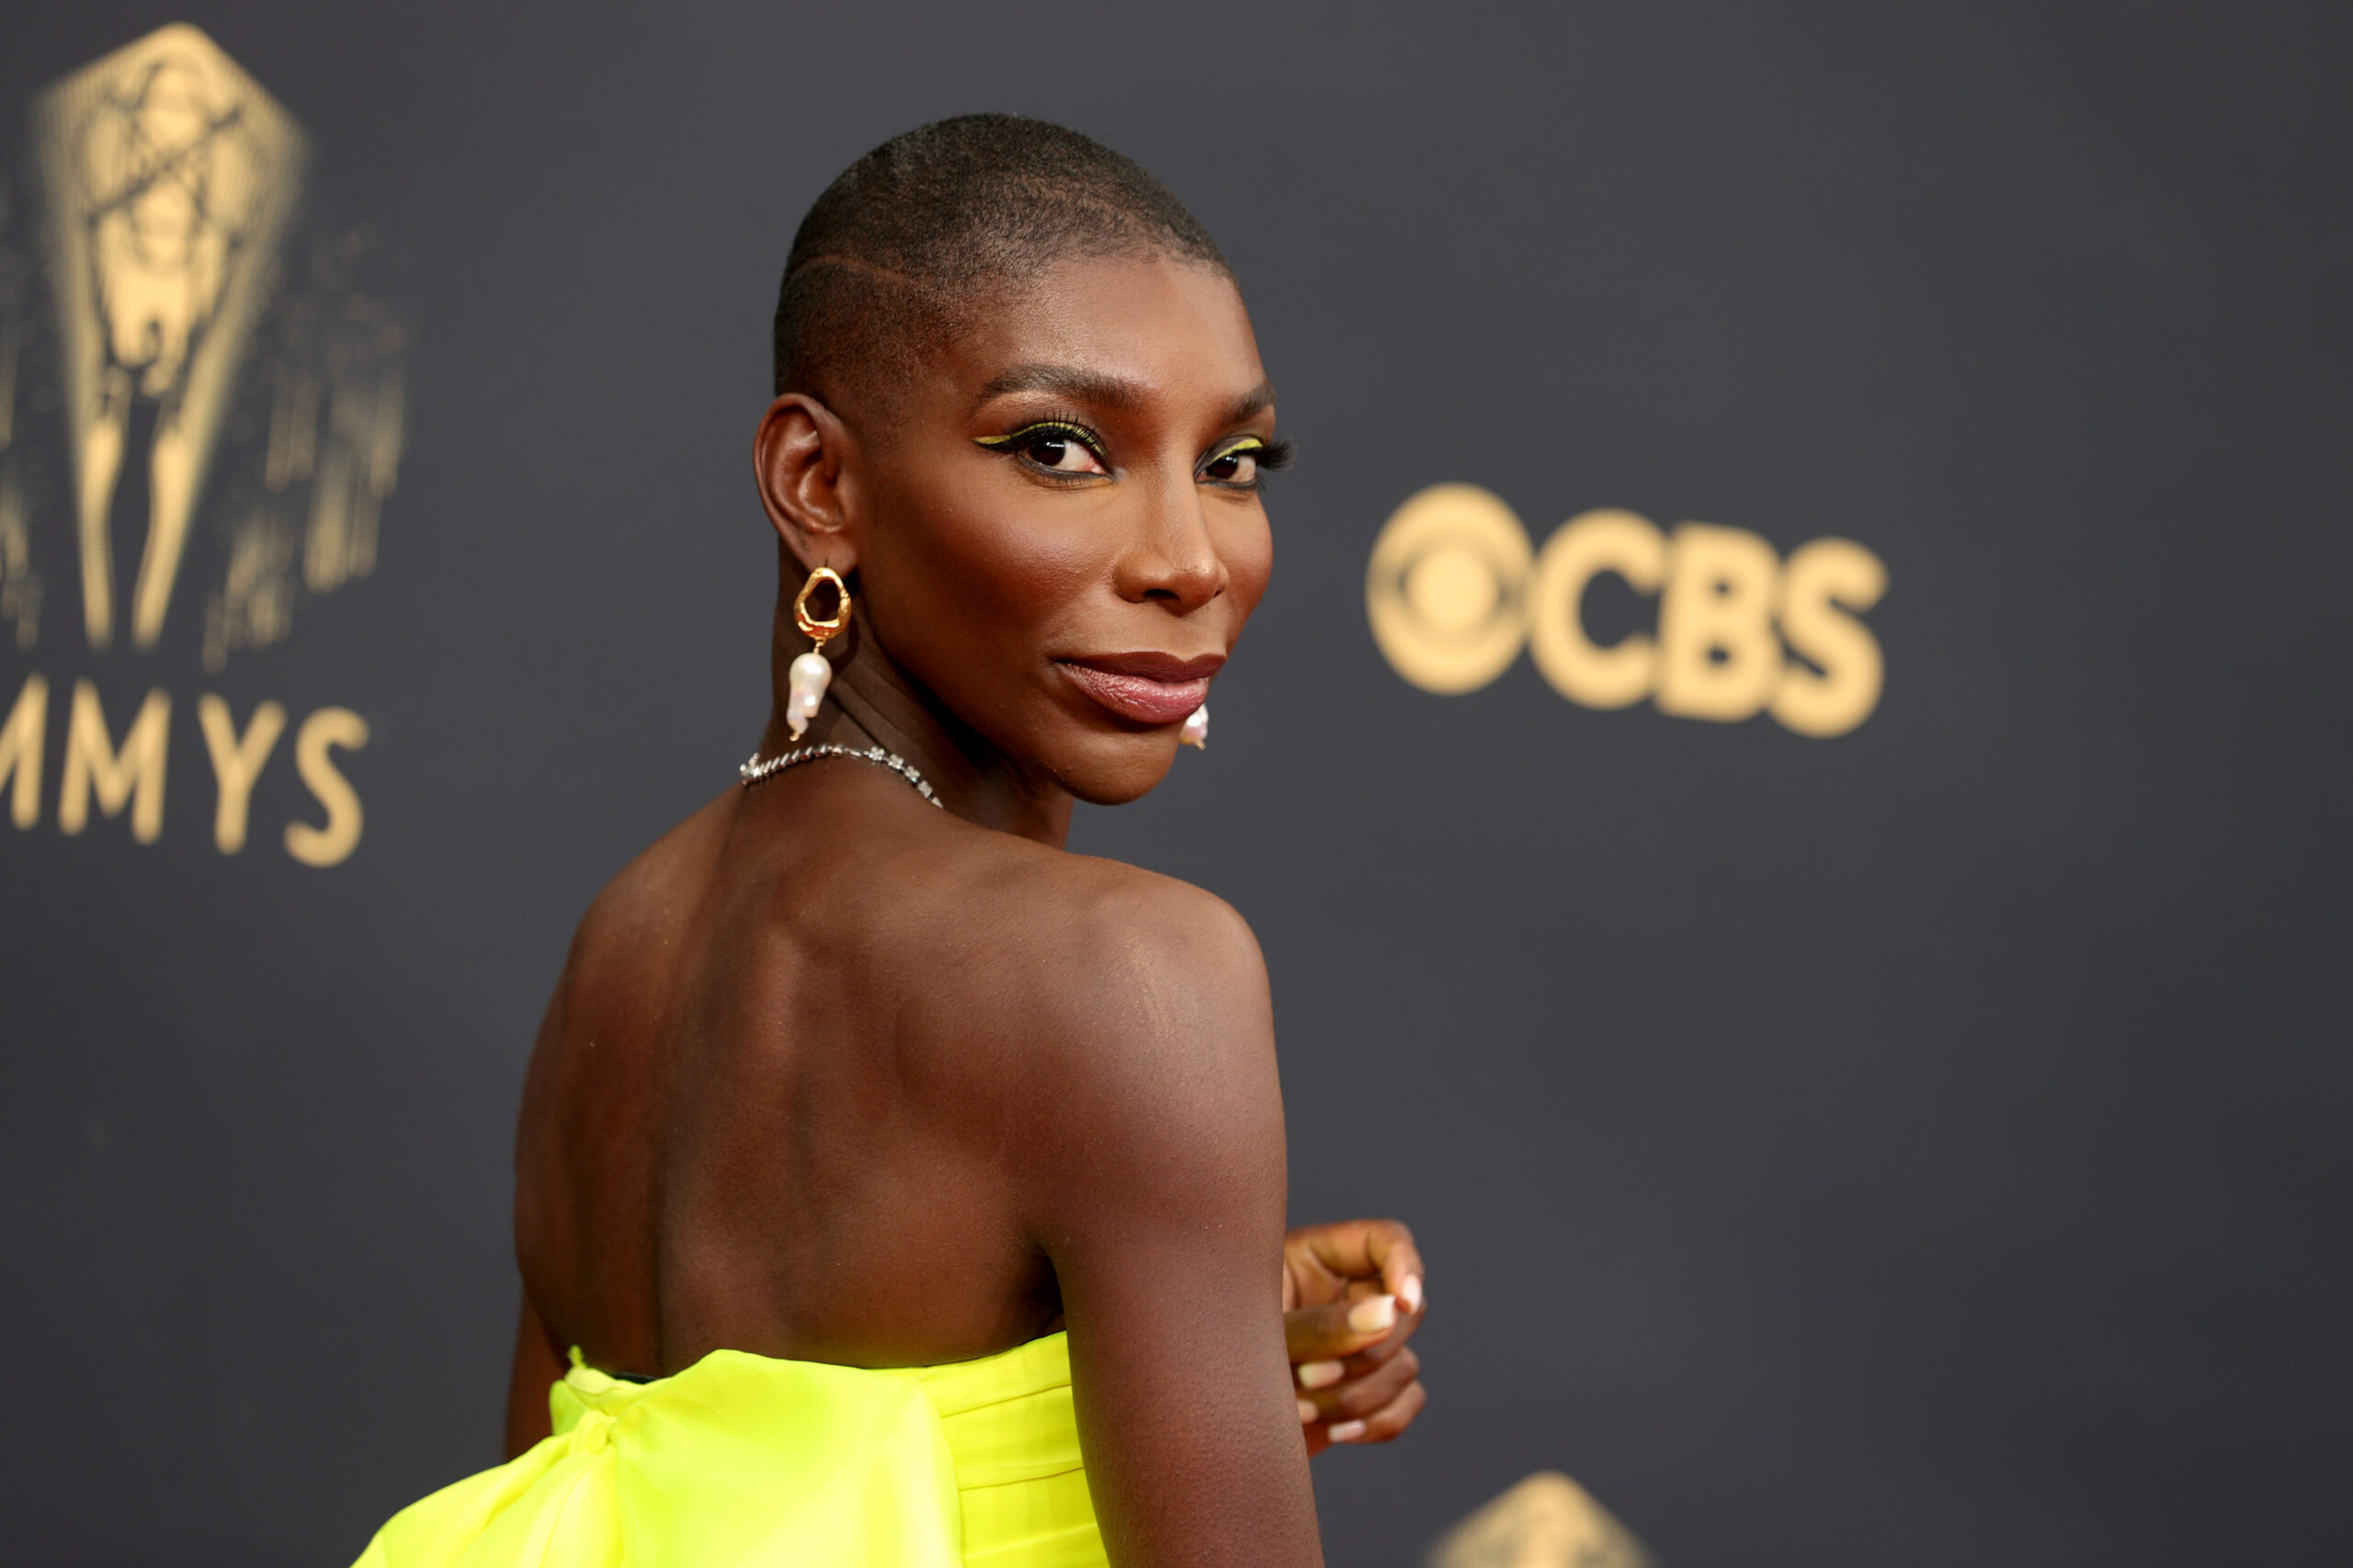 During Emmys Speech, Michaela Coel Dedicated ‘I May Destroy You’ To Survivors Of Sexual Assault